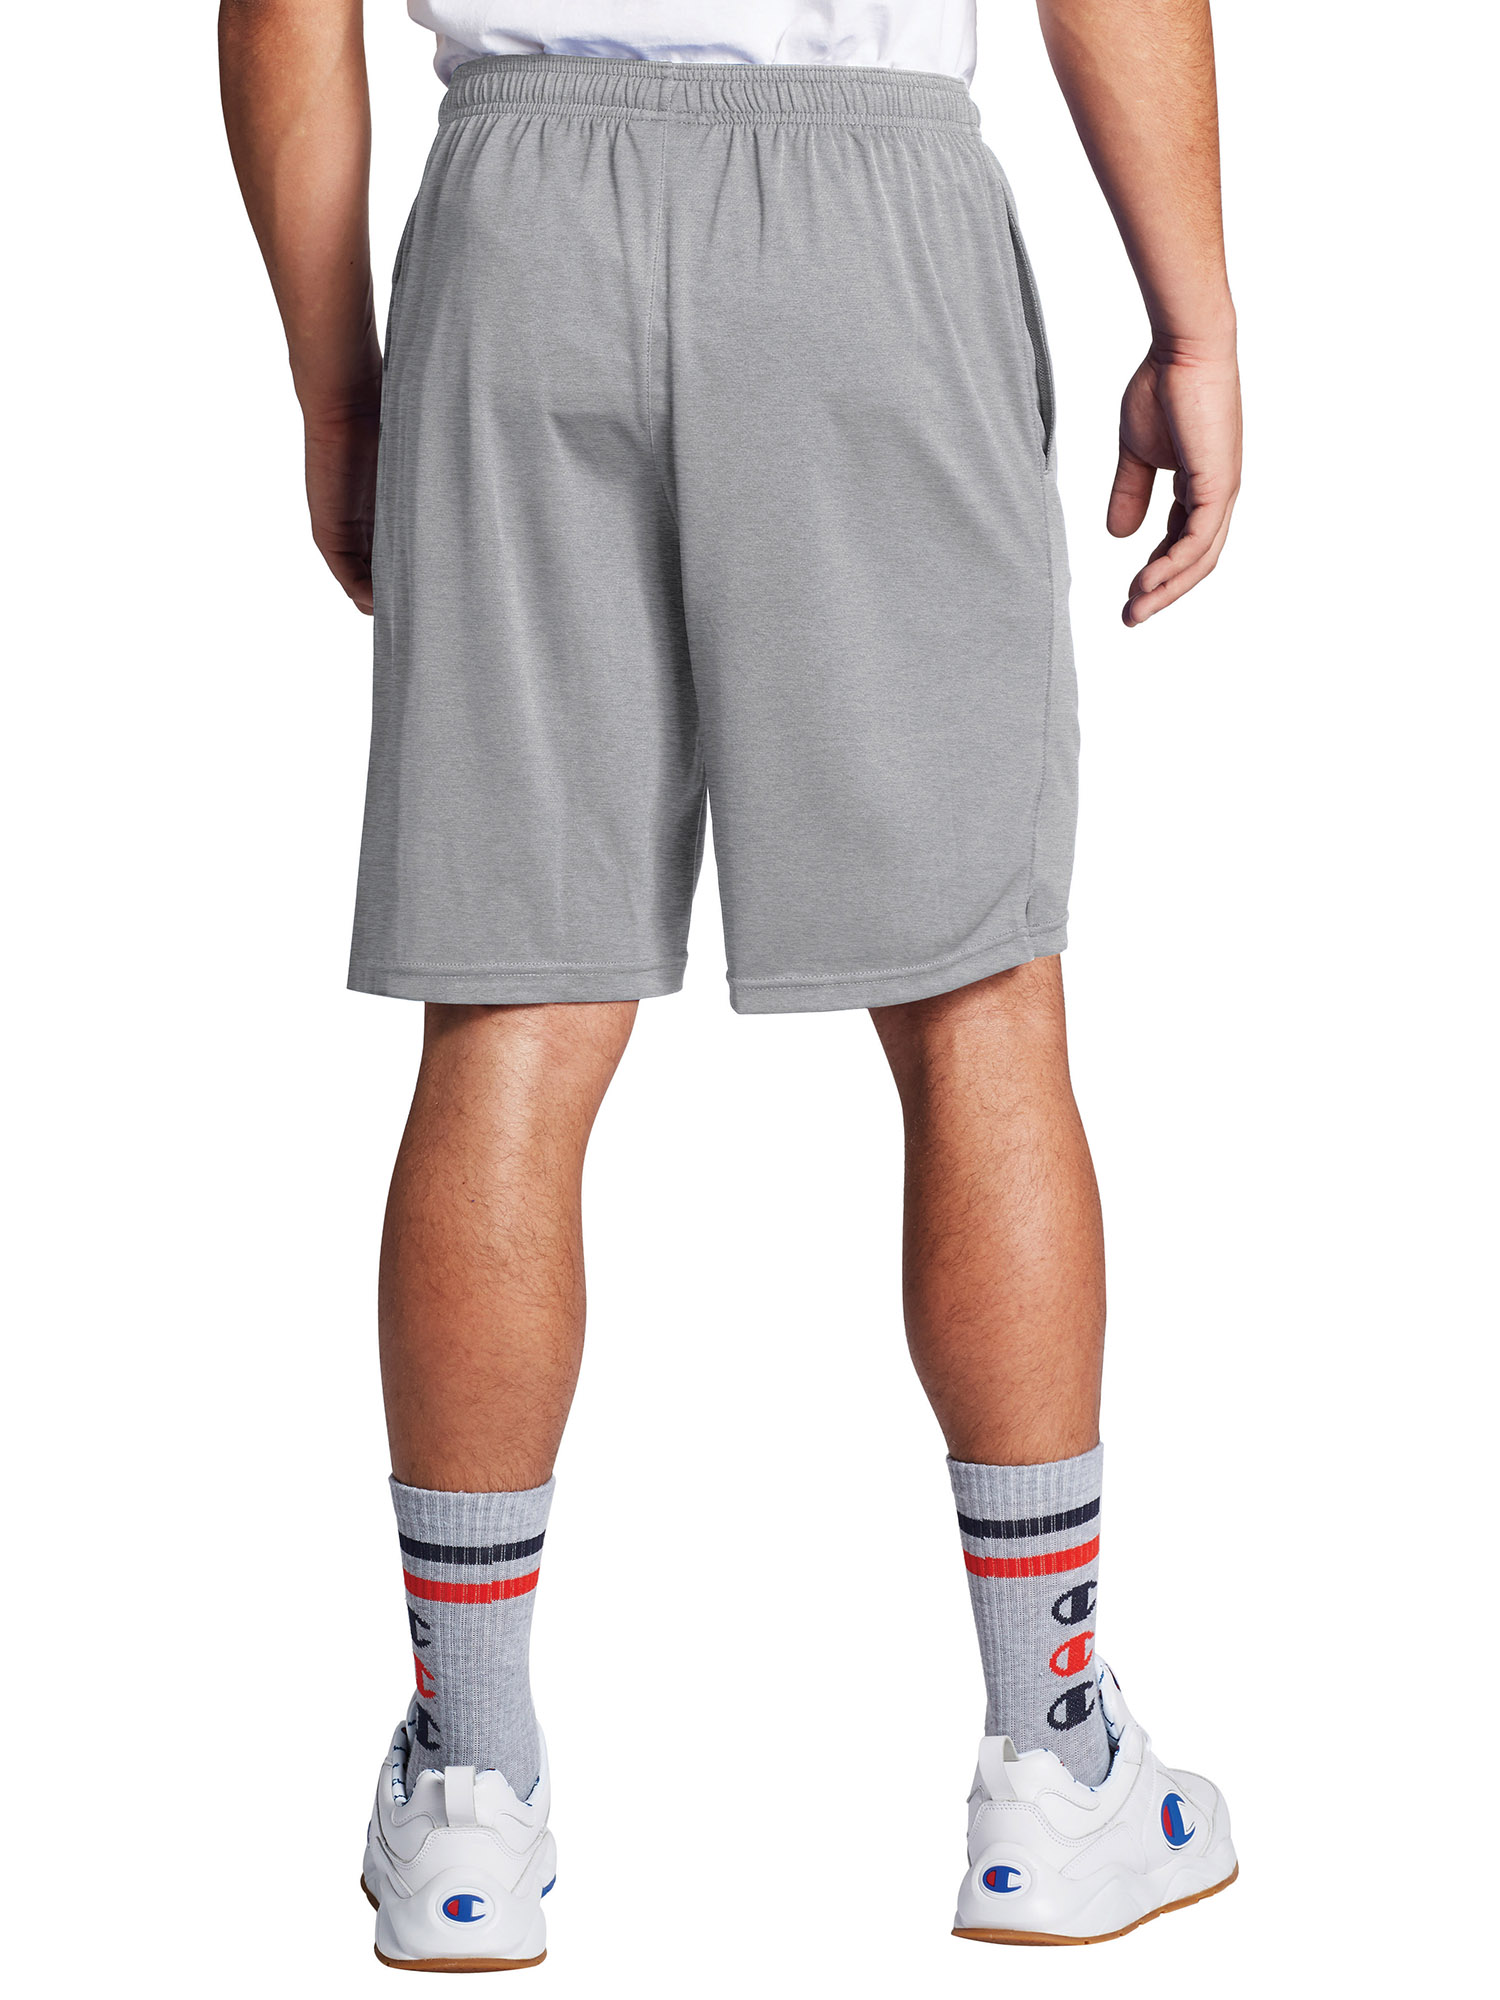 Champion Mens and Big Mens 10" Core Training Short up to Size 2XL - image 5 of 5